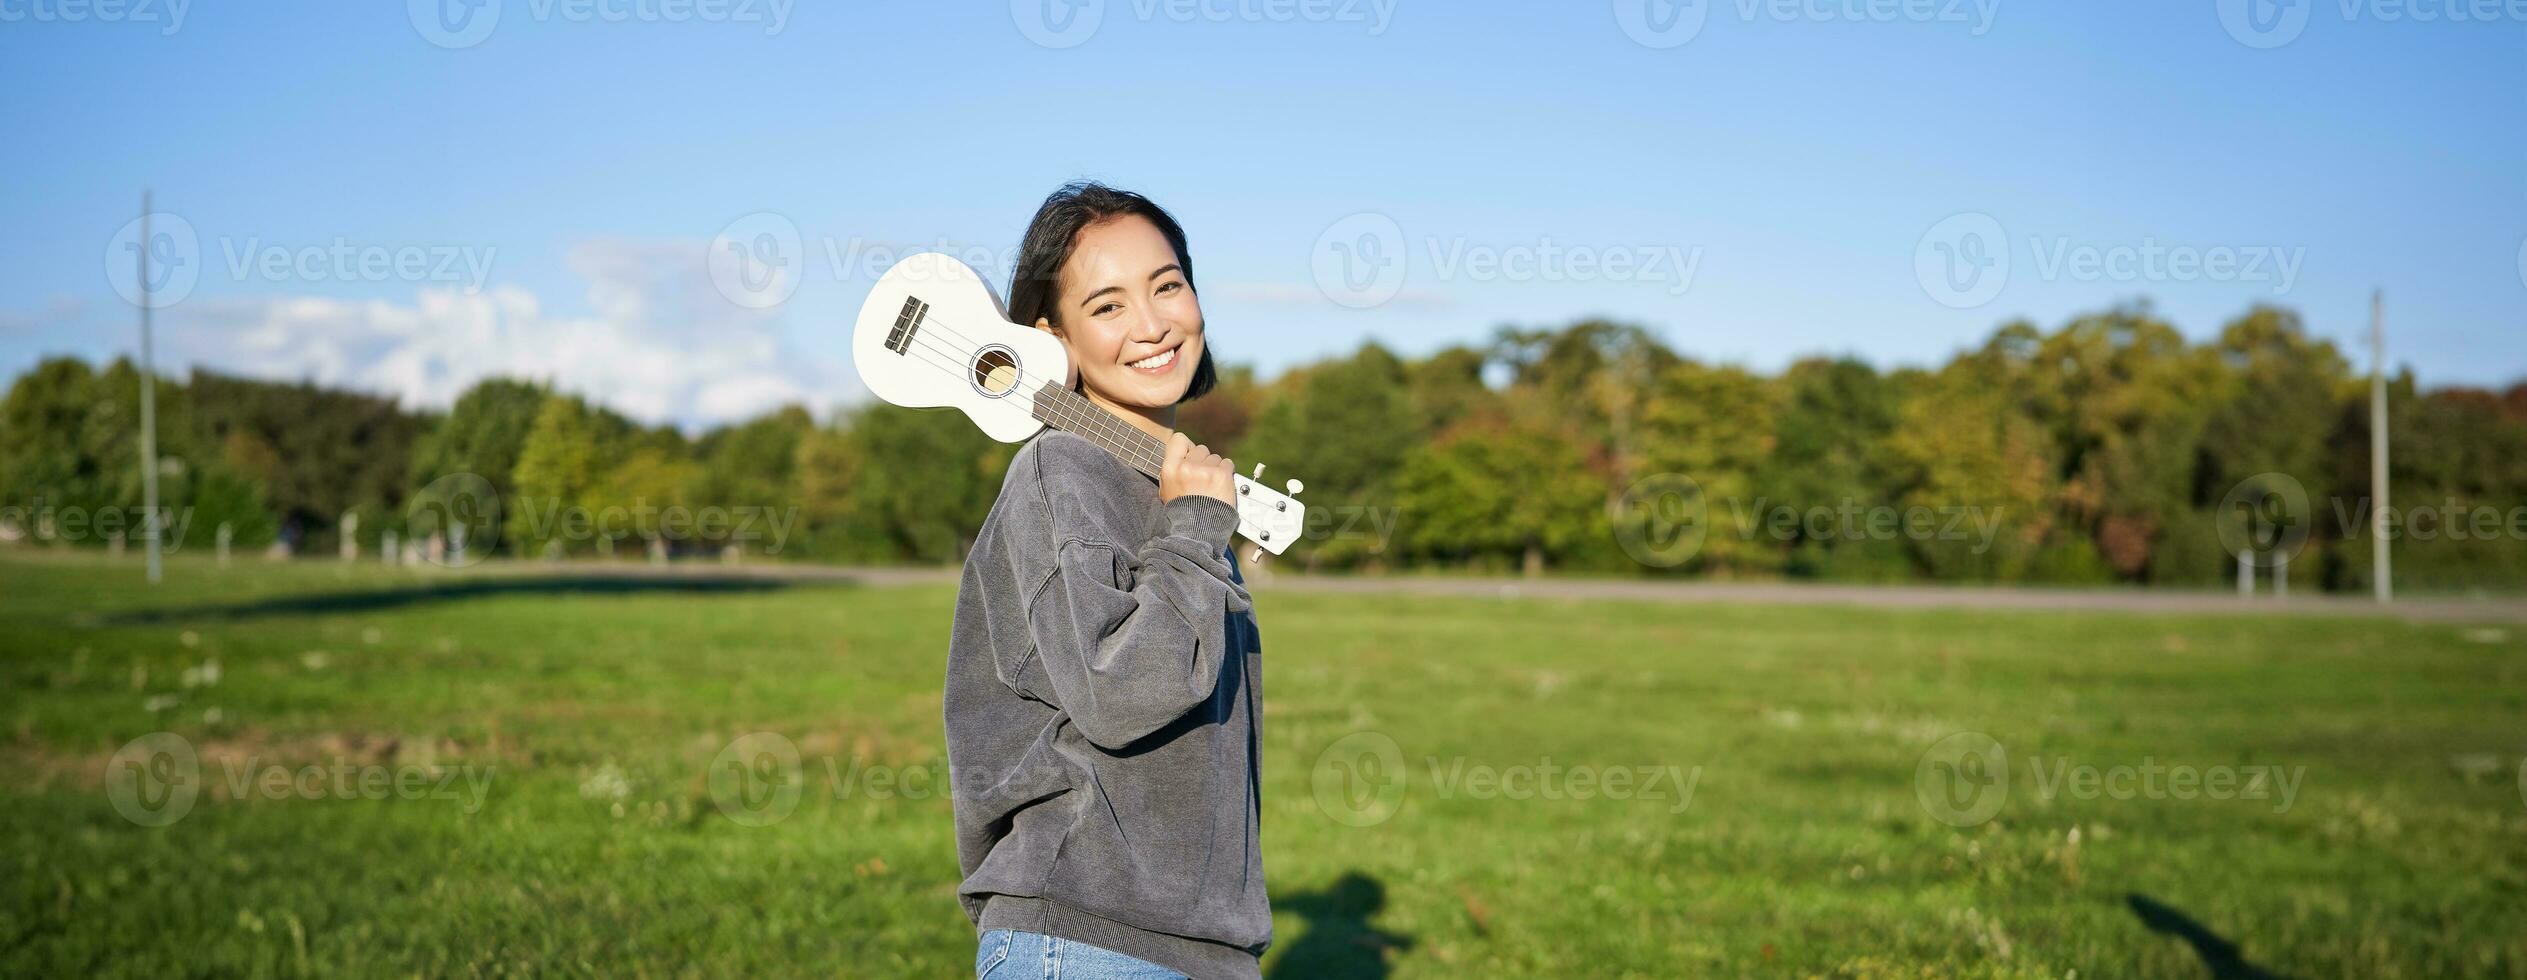 Young hipster girl, traveler holding her ukulele, playing outdoors in park and smiling photo